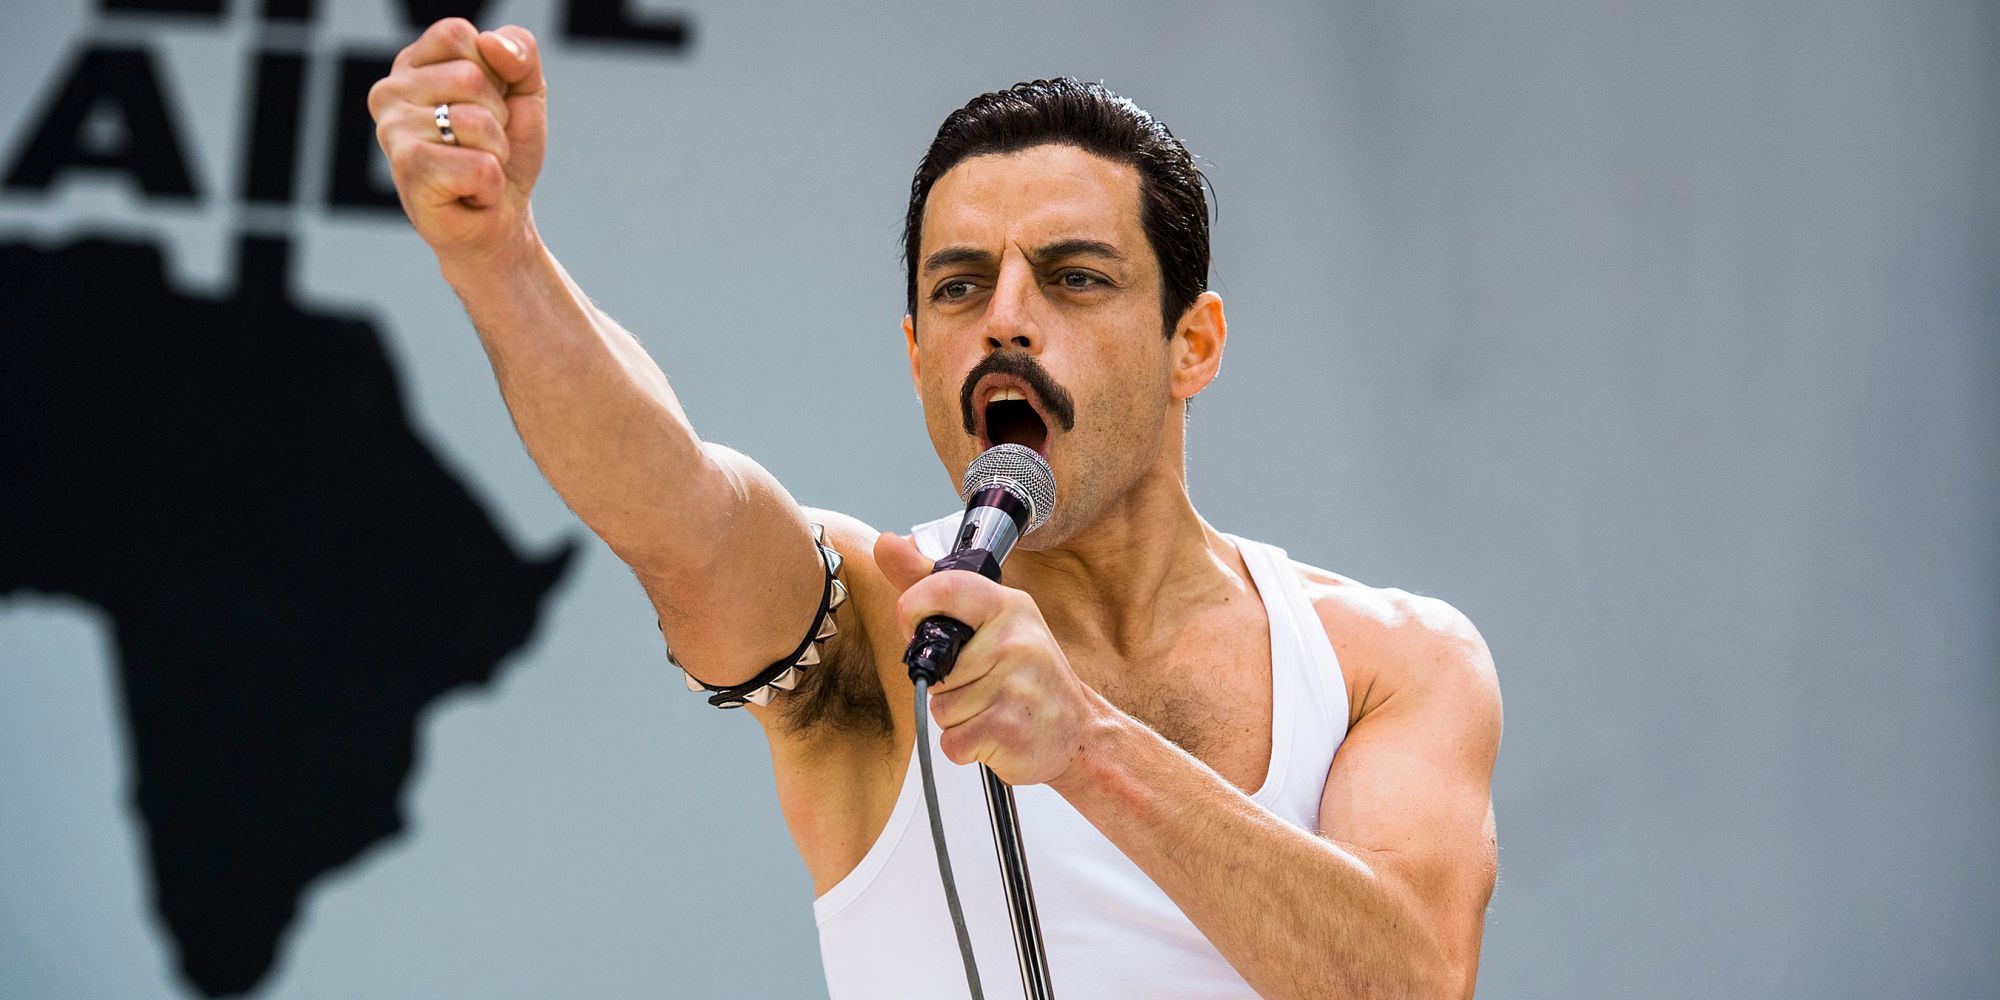 Bohemian Rhapsody Controversy Explained: Why It Shouldn’t Win Best Picture